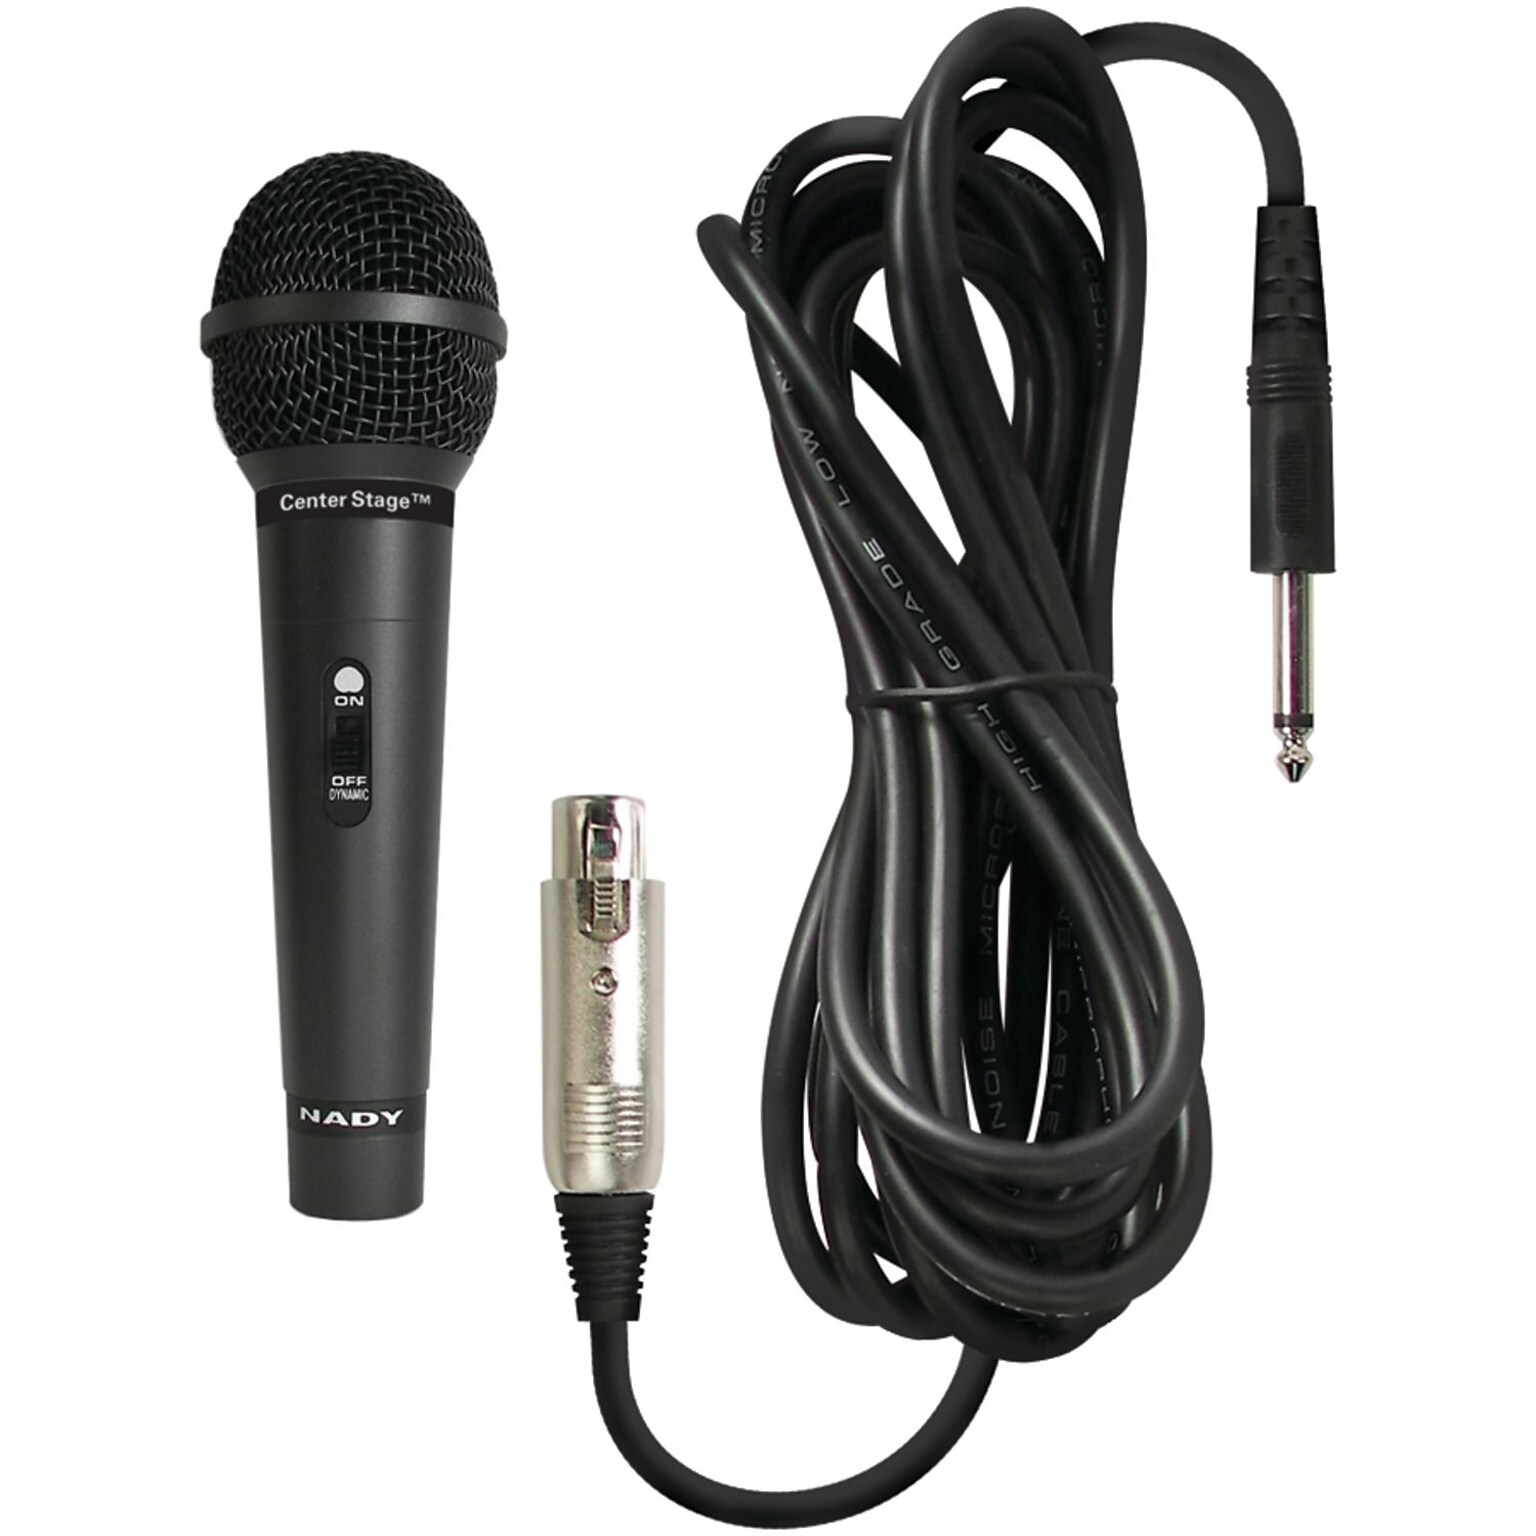 Nady® CenterStage MSC3 Professional Quality Microphone Kit